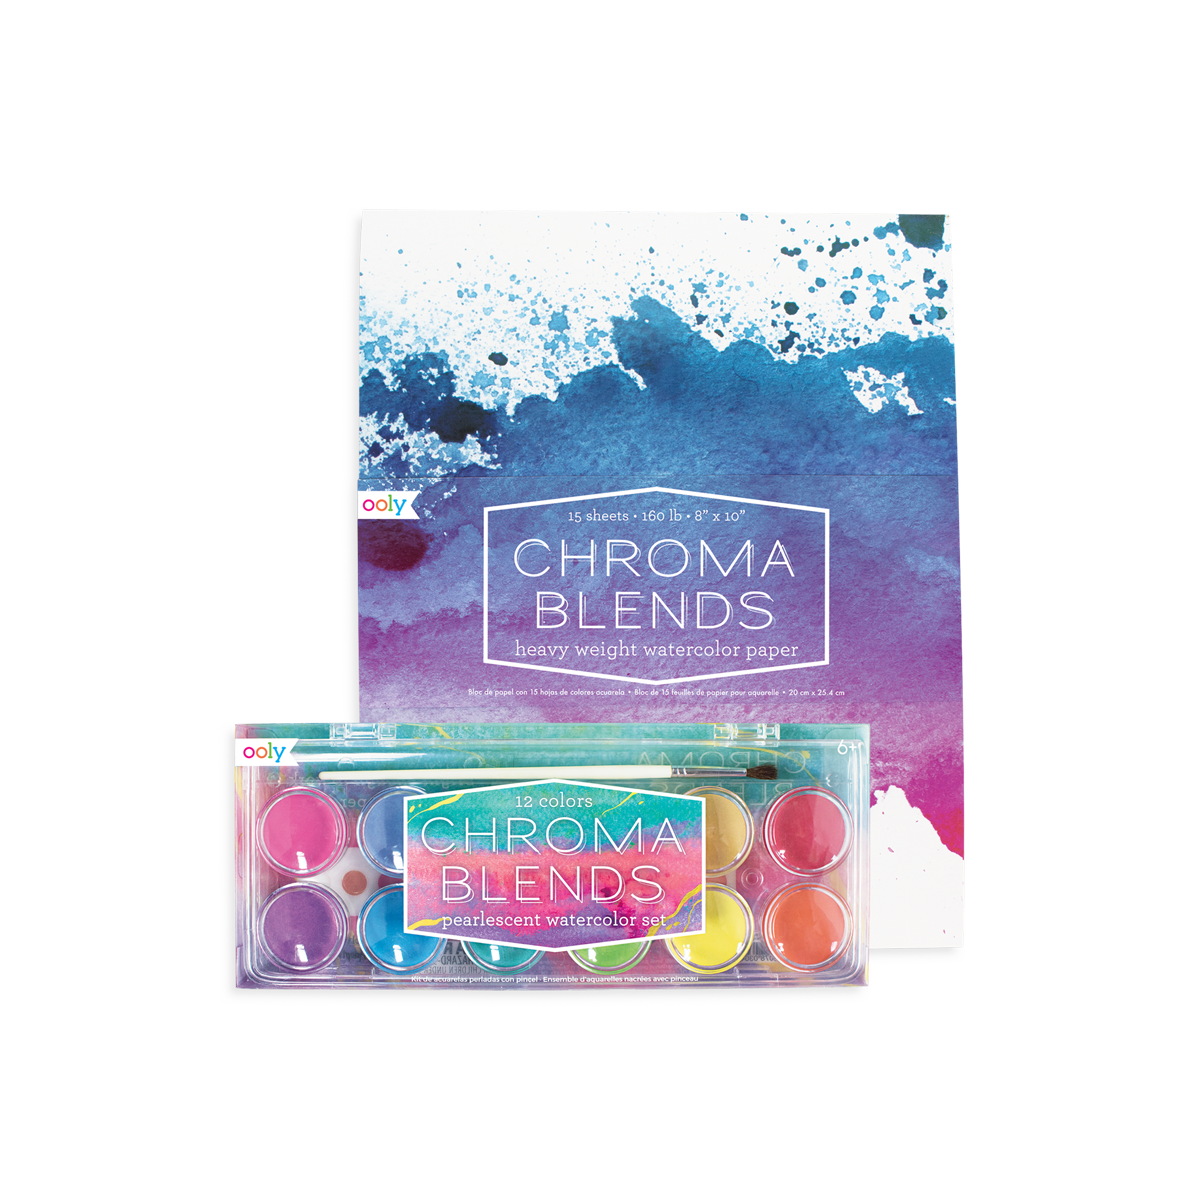 Chroma Blends Pearlescent Watercolor Paint Set – Soca Girl